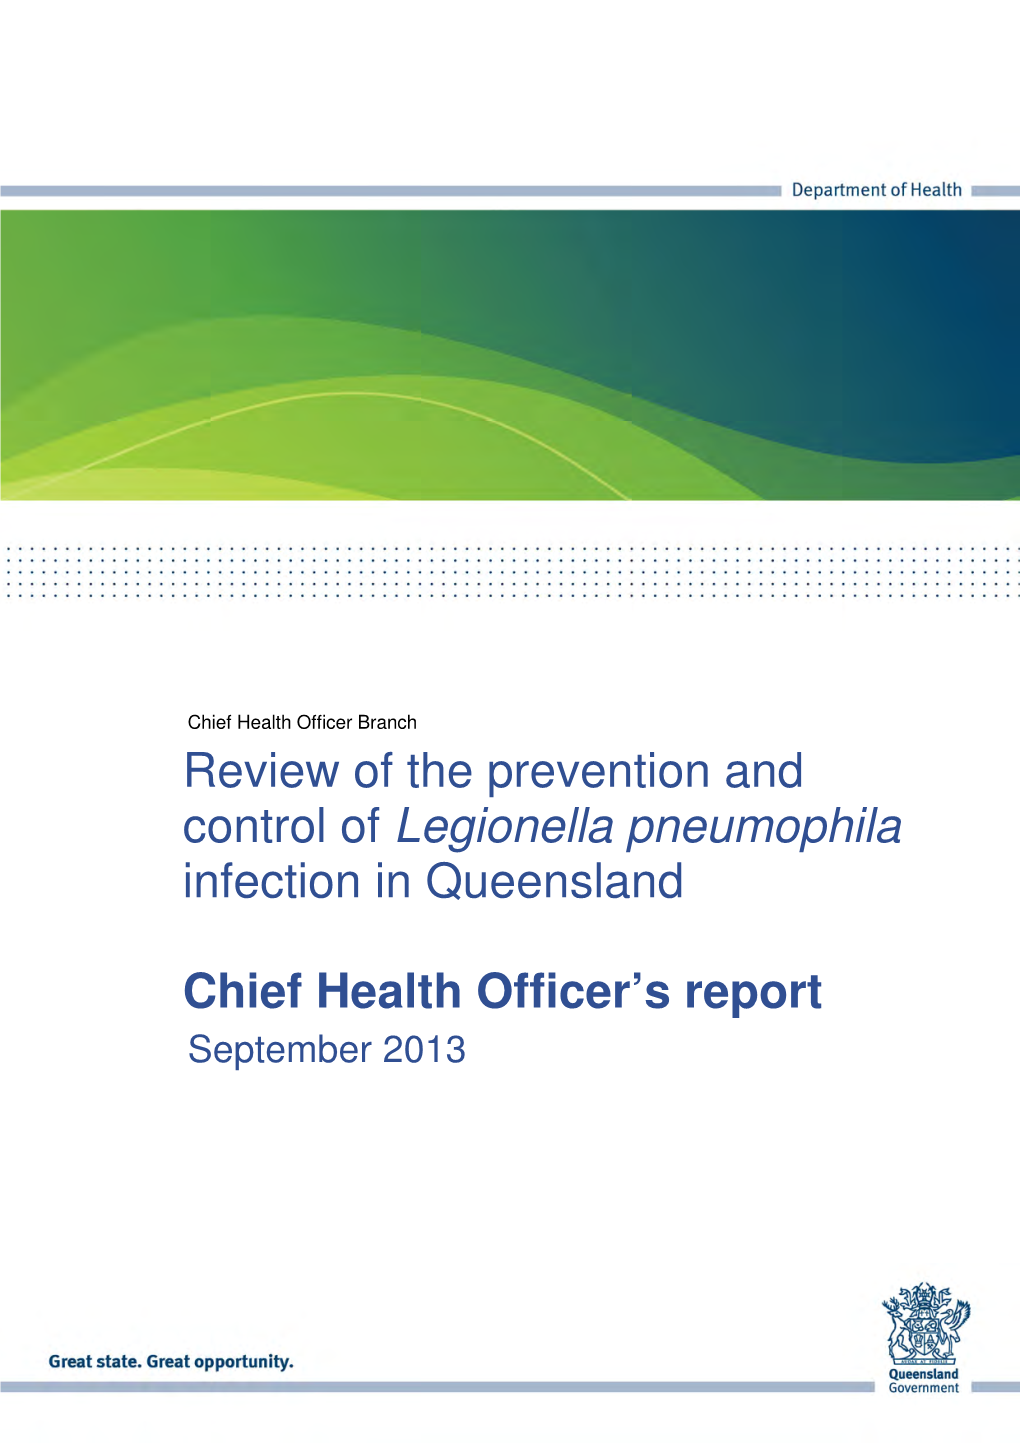 Chief Health Officer's Review of the Prevention and Control of Legionella Pneumophila Infection in Queensland